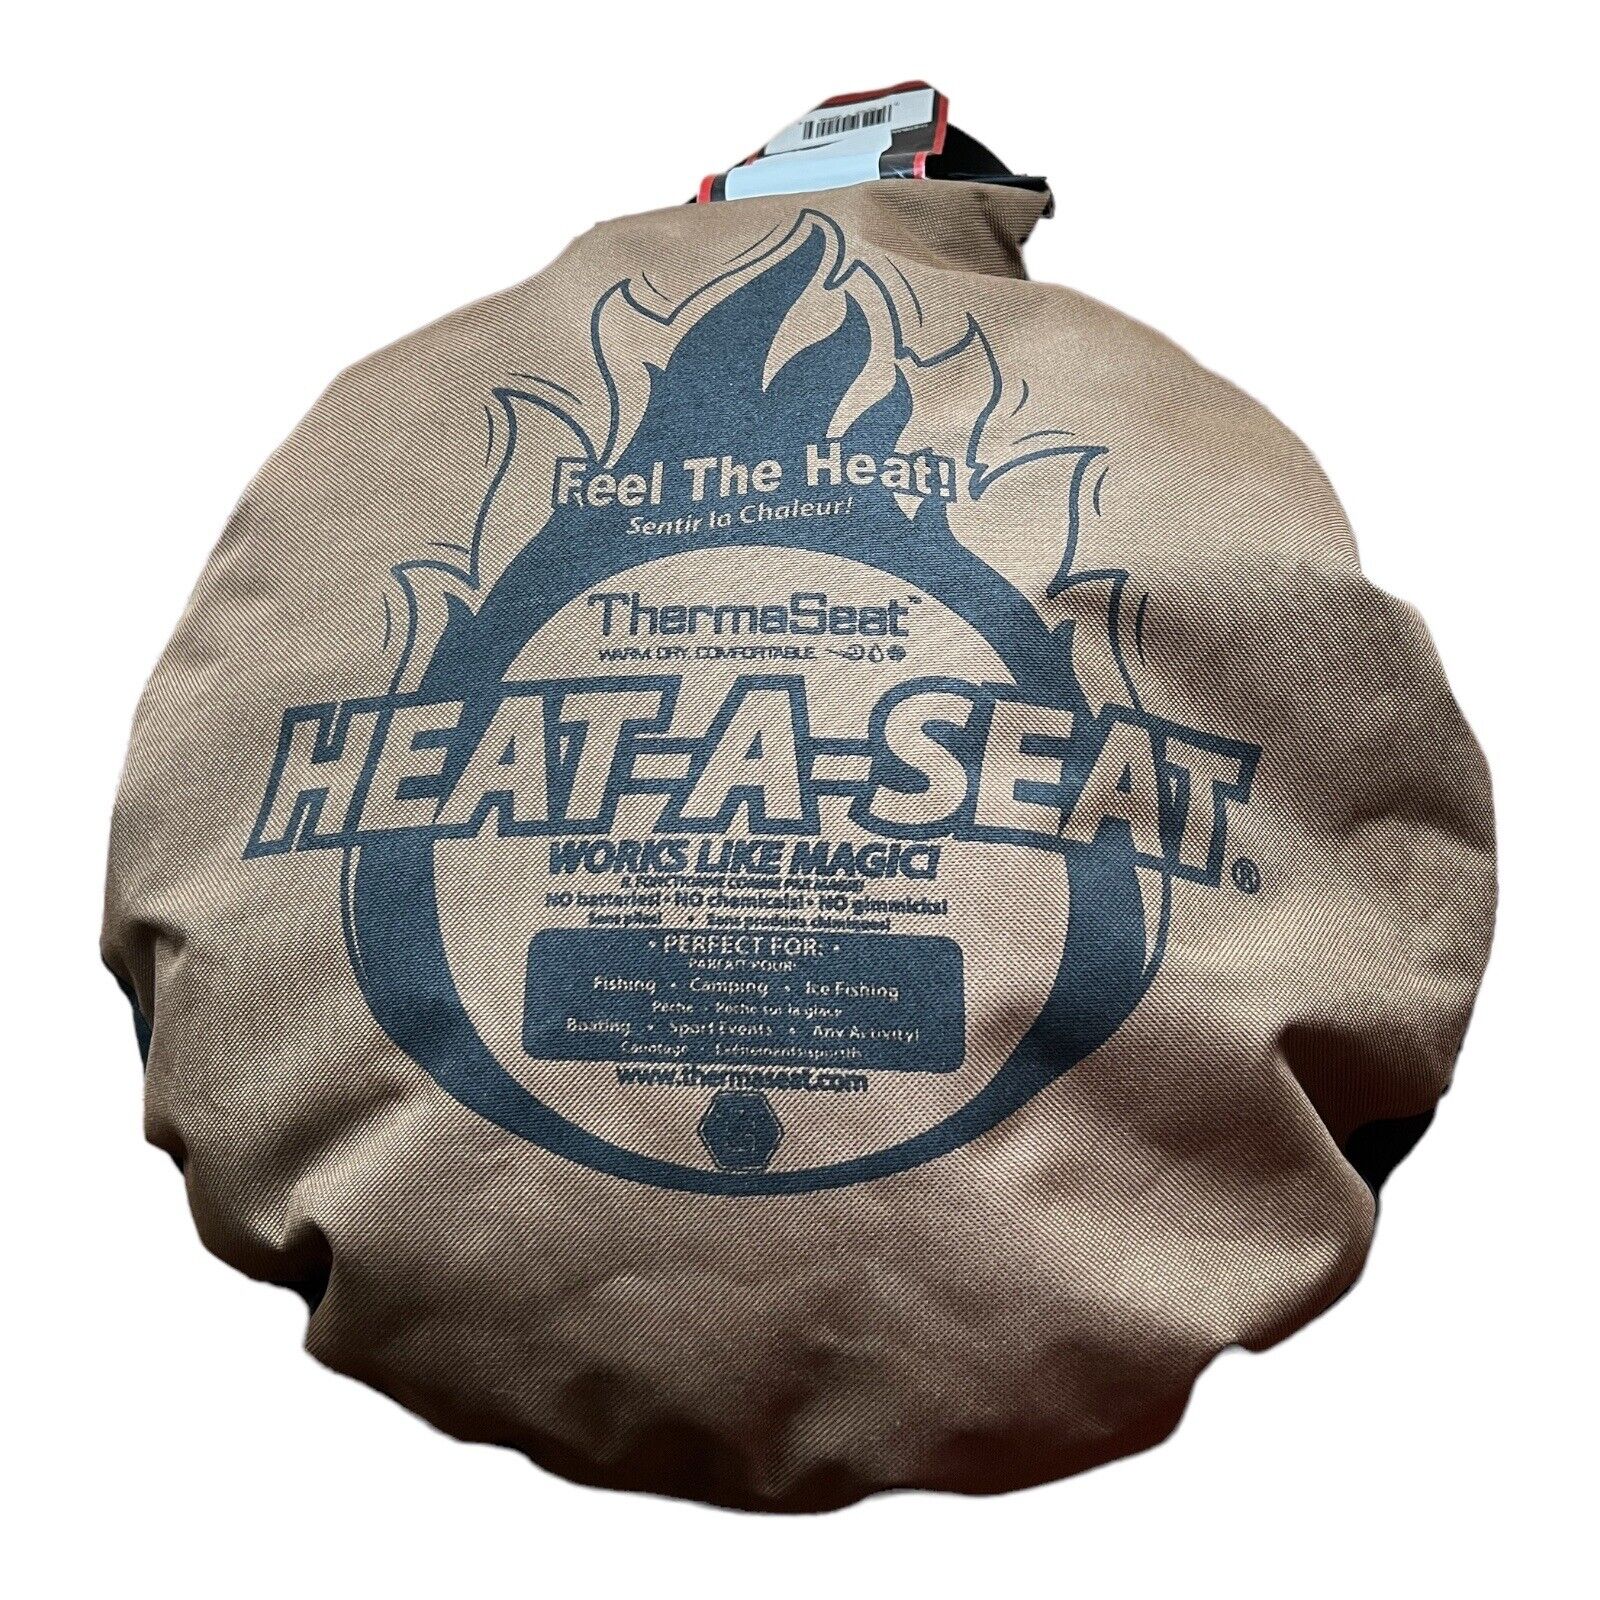 New Therm-a-seat Heat-a-seat Insulated Hunting Seat Cushion/pillow Black/brown